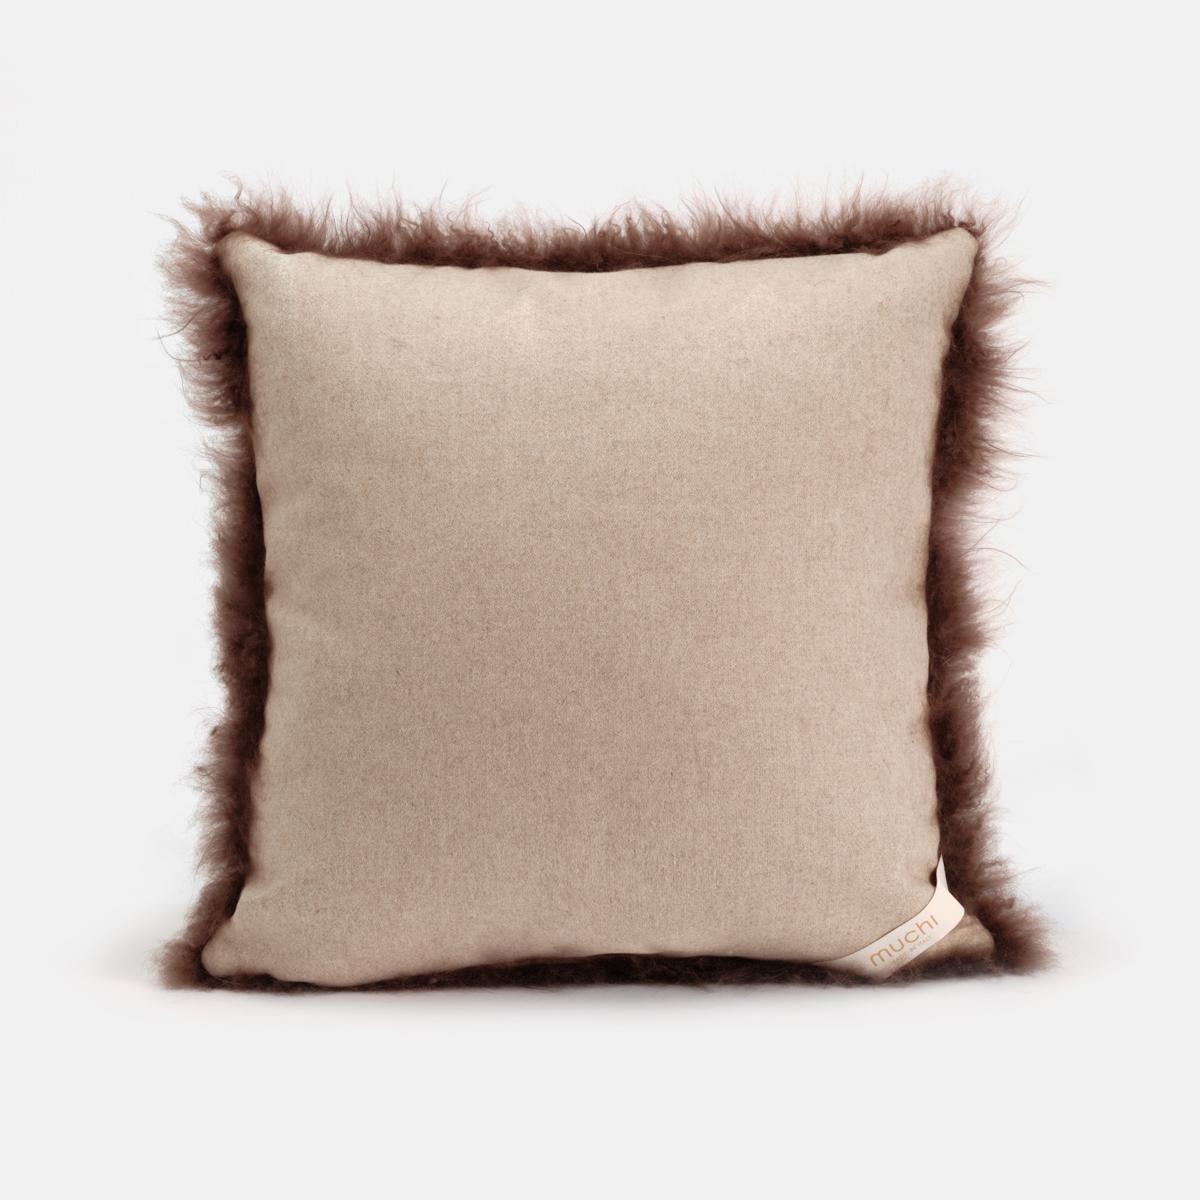 Hand-Crafted Chocolate Brown Cloud White Natural Cashmere Fur Pillow Cushion by Muchi Decor For Sale